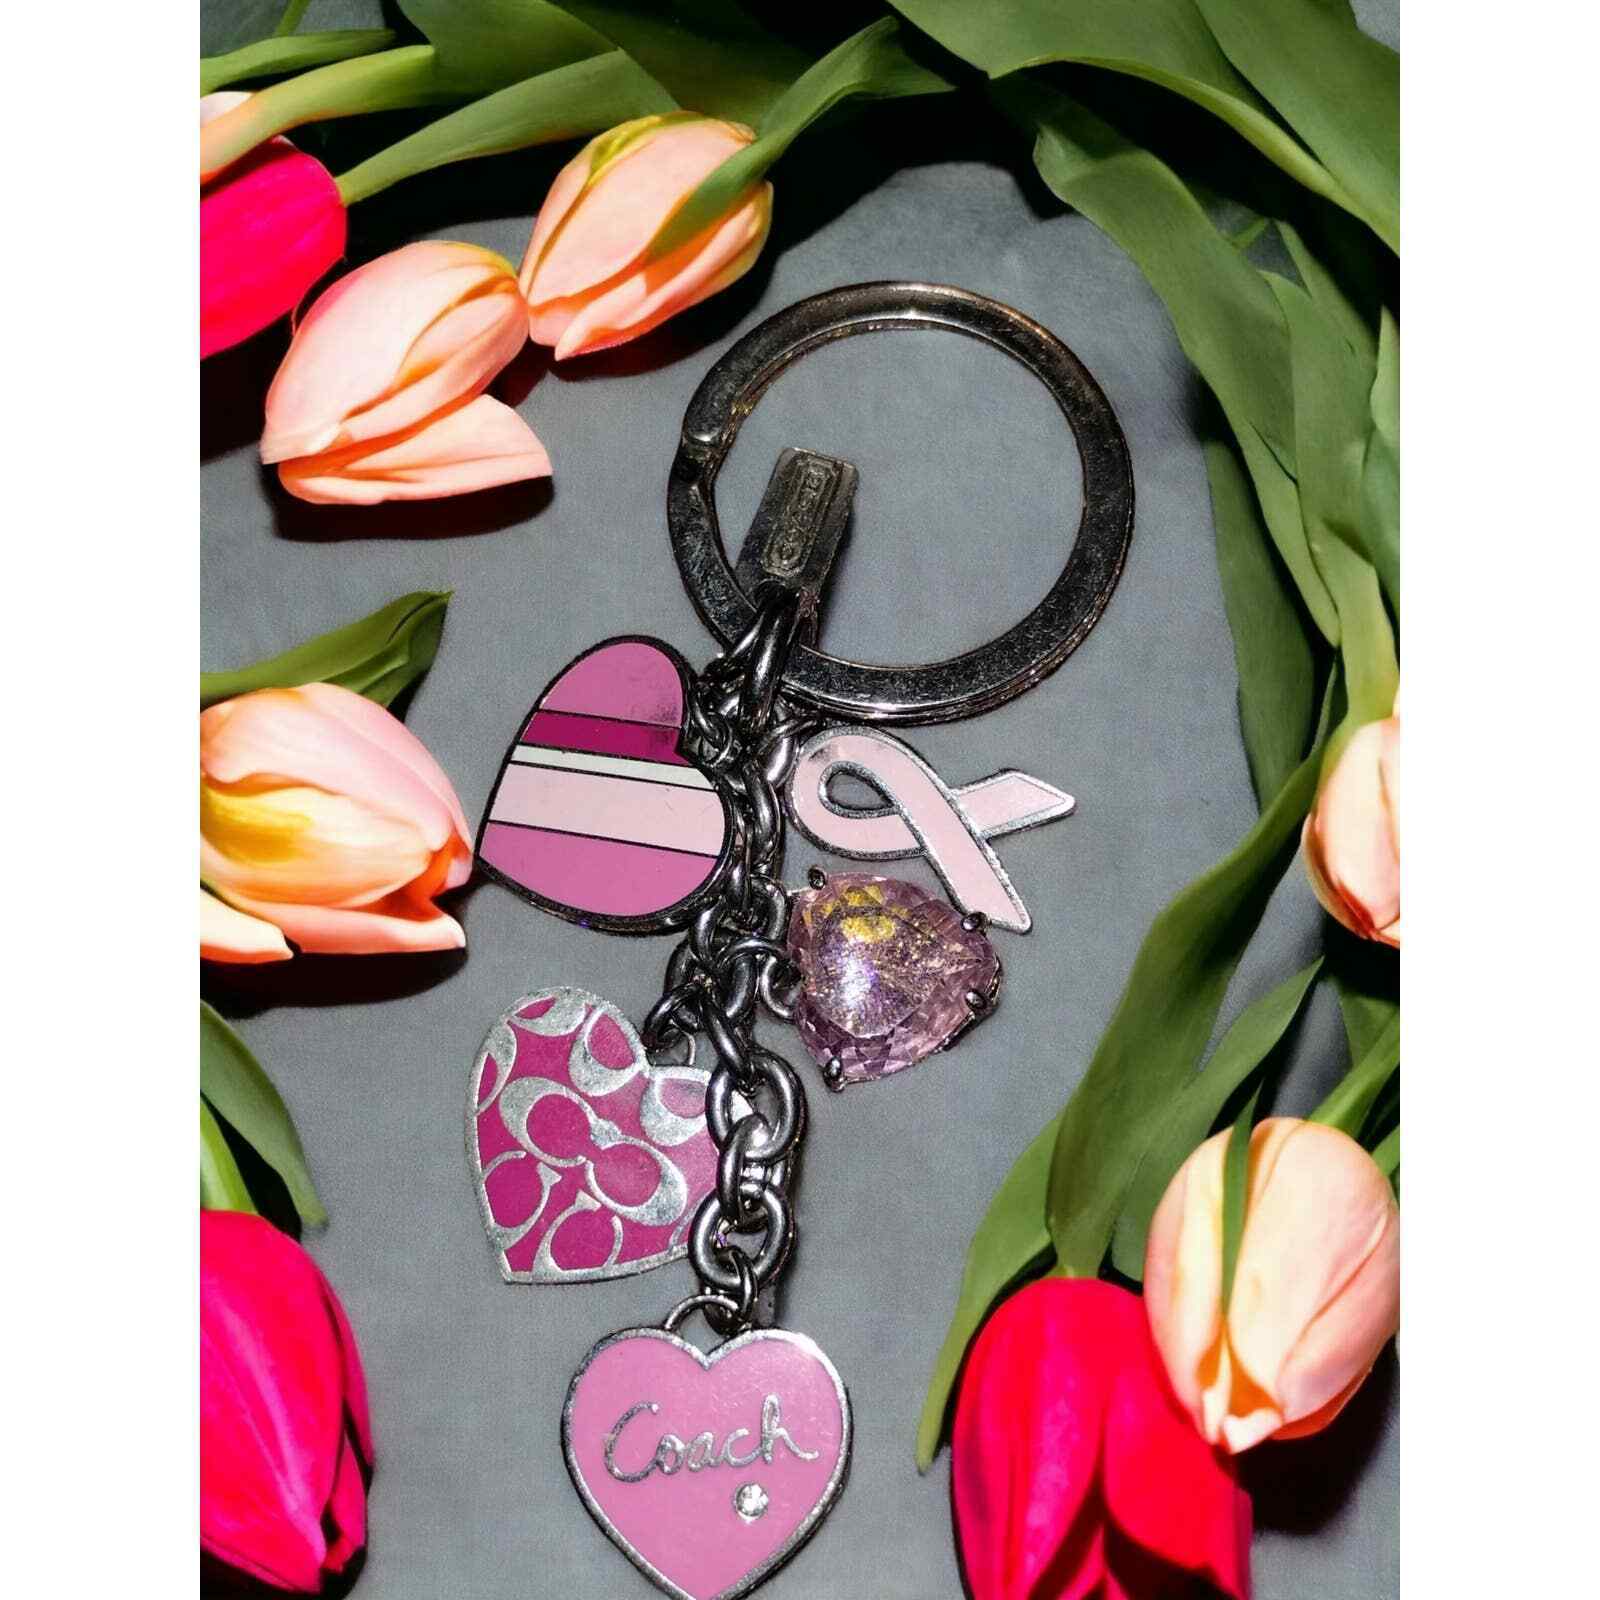 Retired coach vintage keychain with hearts and breast cancer sign